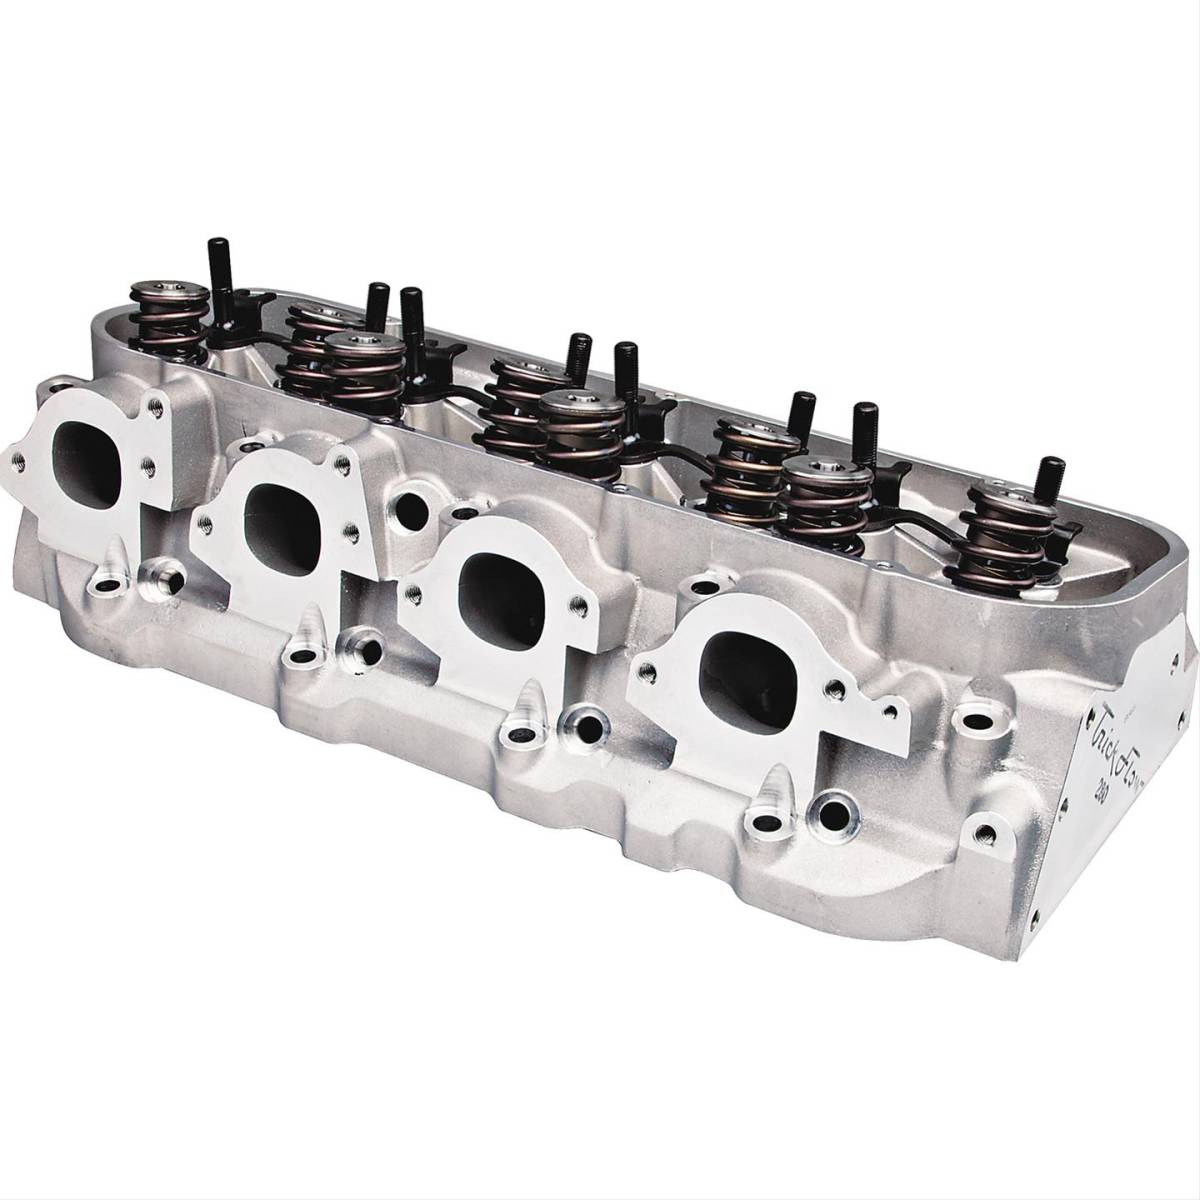 Trickflow - Trick Flow BBC 280cc PowerOval Cylinder Head, Big Block Chevy, Chromoly Retainers, Max Lift .700, Hydraulic Roller - Image 1